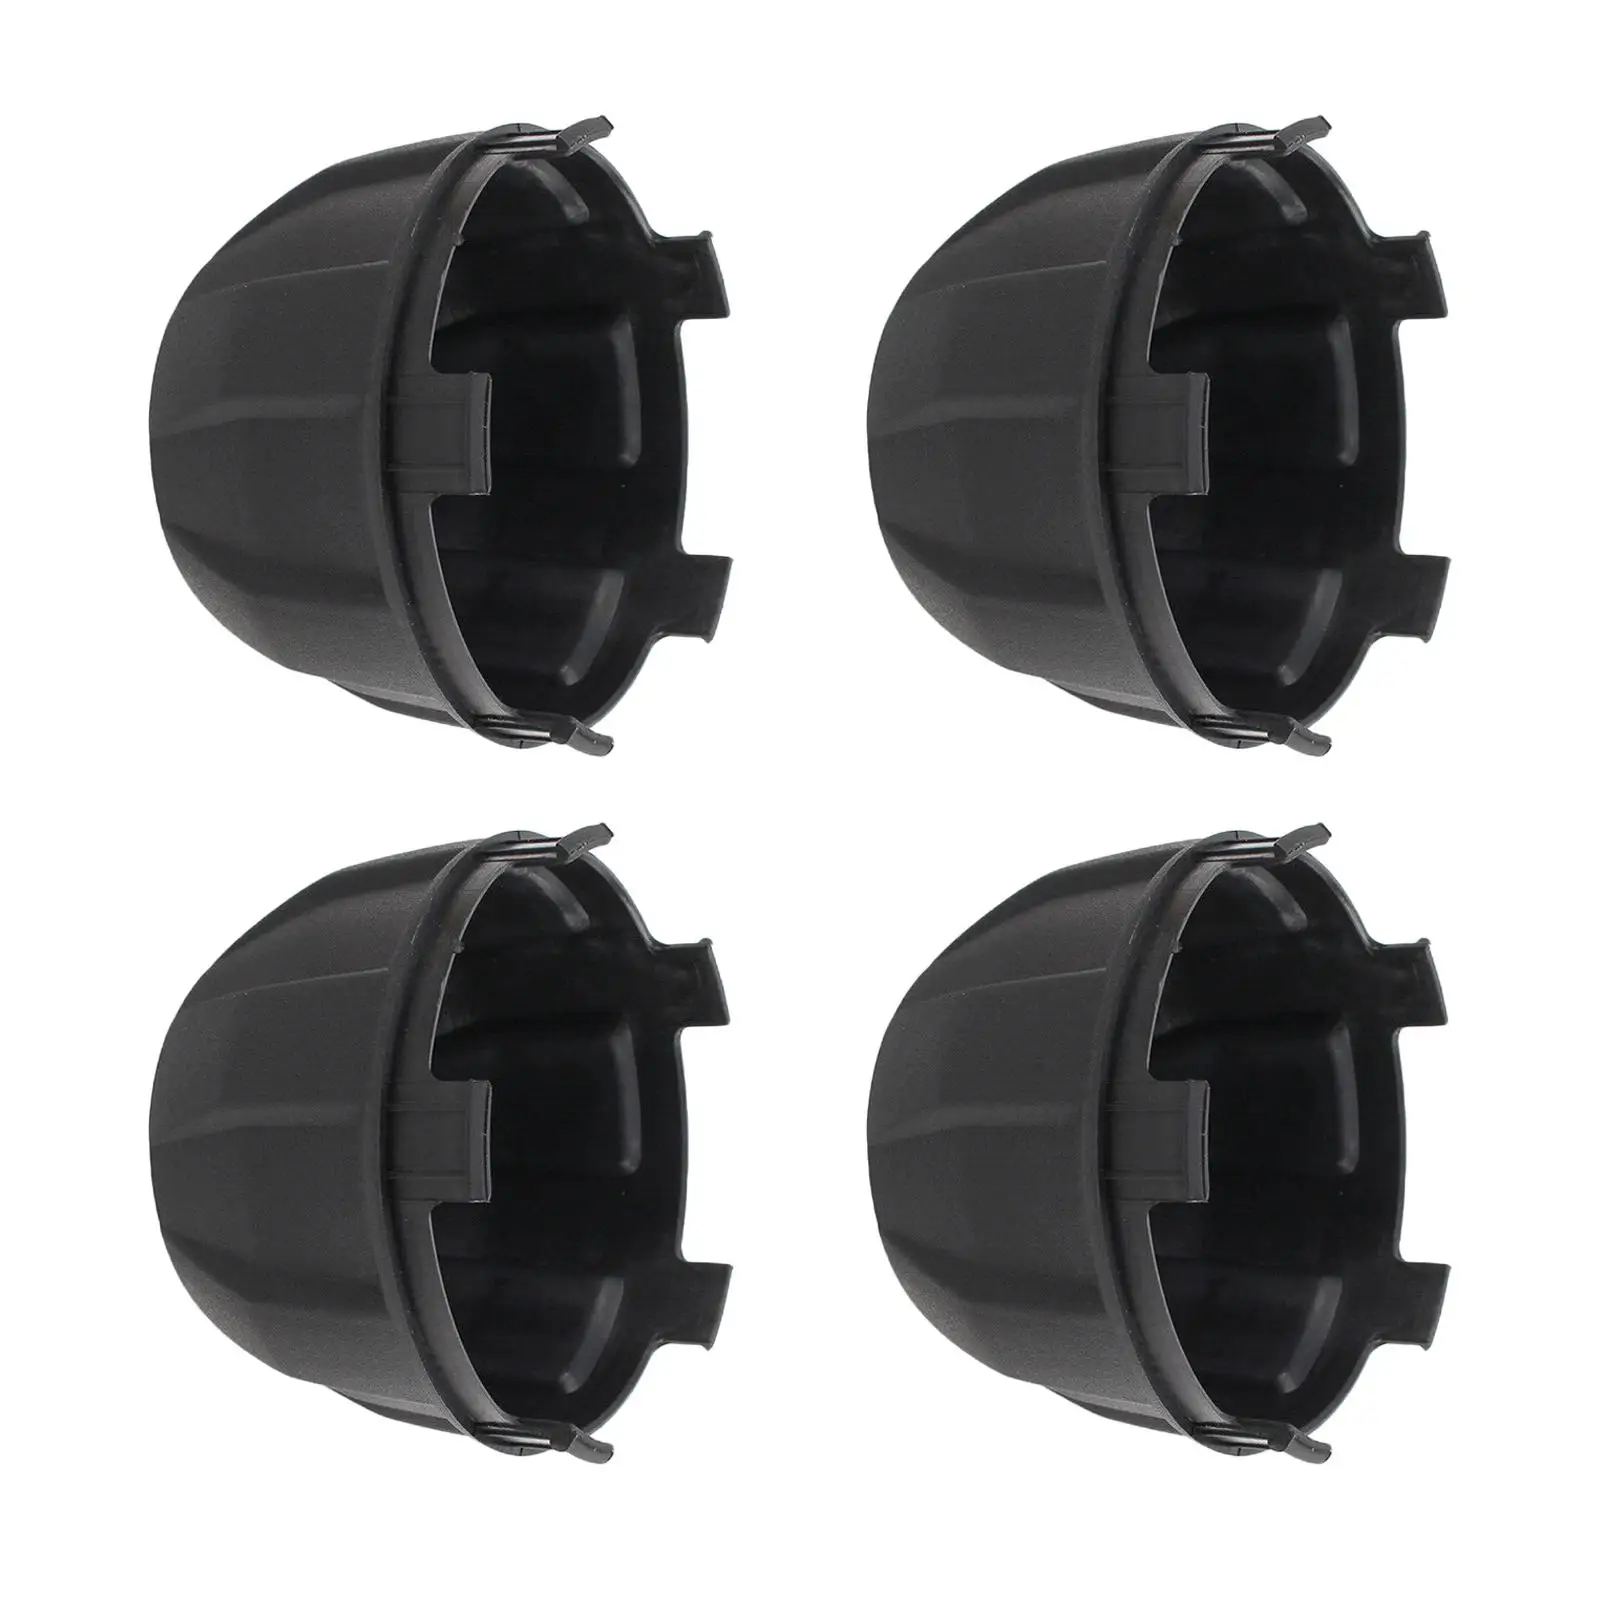 4x Tire Wheel Hub Caps Assembly Motorcycle Black Cap Cover 11065-1341 for Teryx Krx 1000 Accessories Replacement